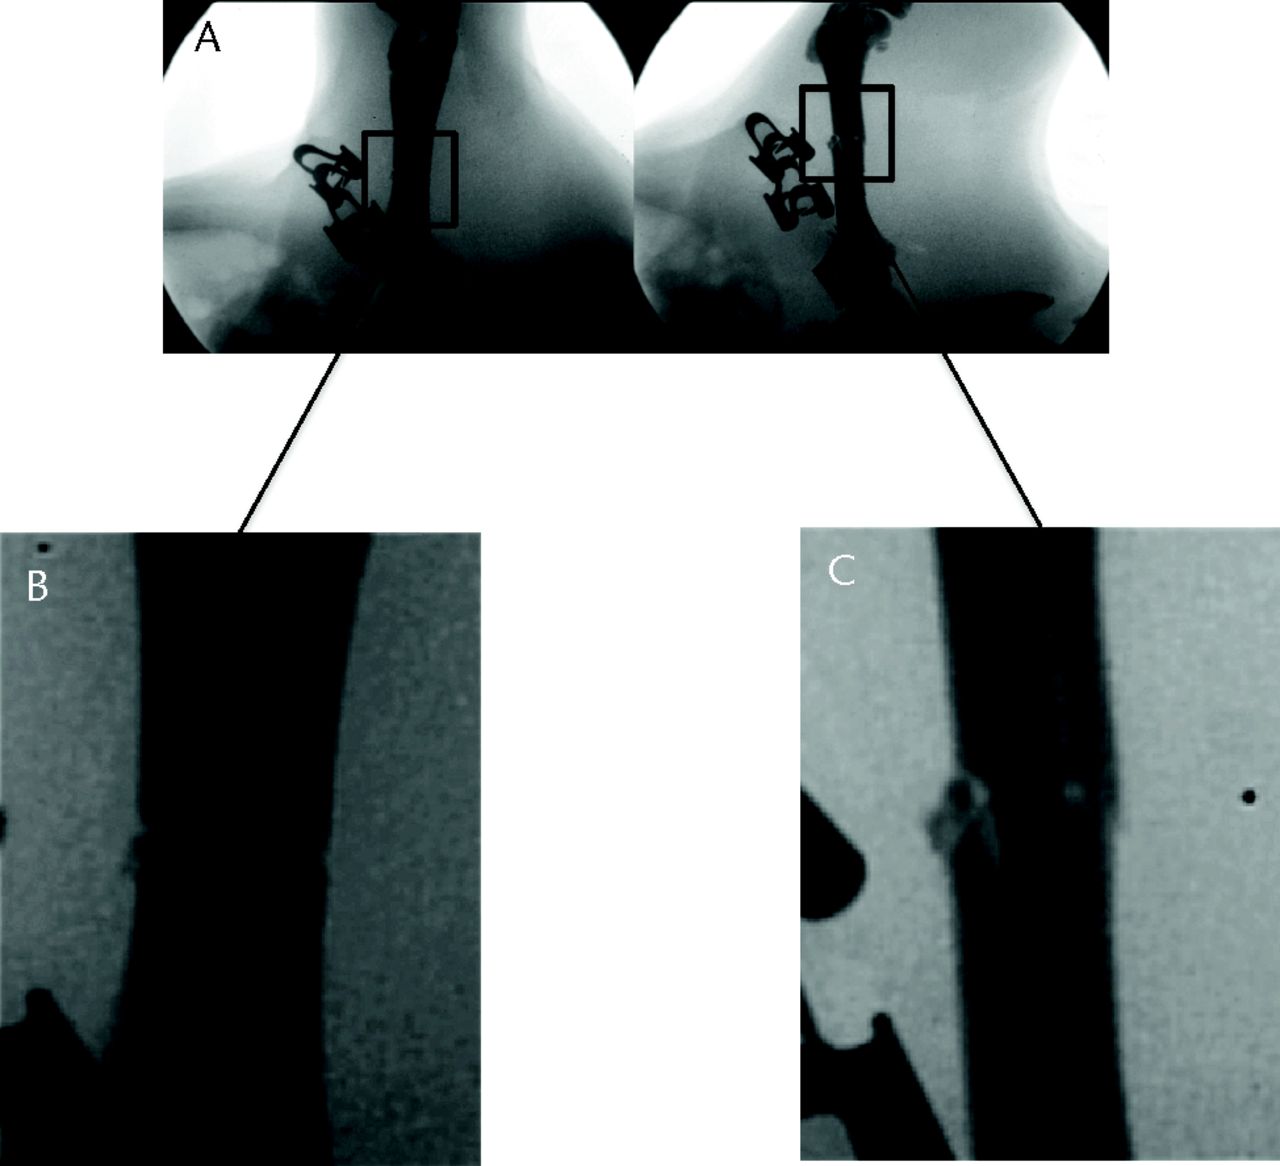 Fig. 4 
          Fluoroscopic images showing an example
of slight comminution in an acceptable fracture with fracture sites
magnified.
        